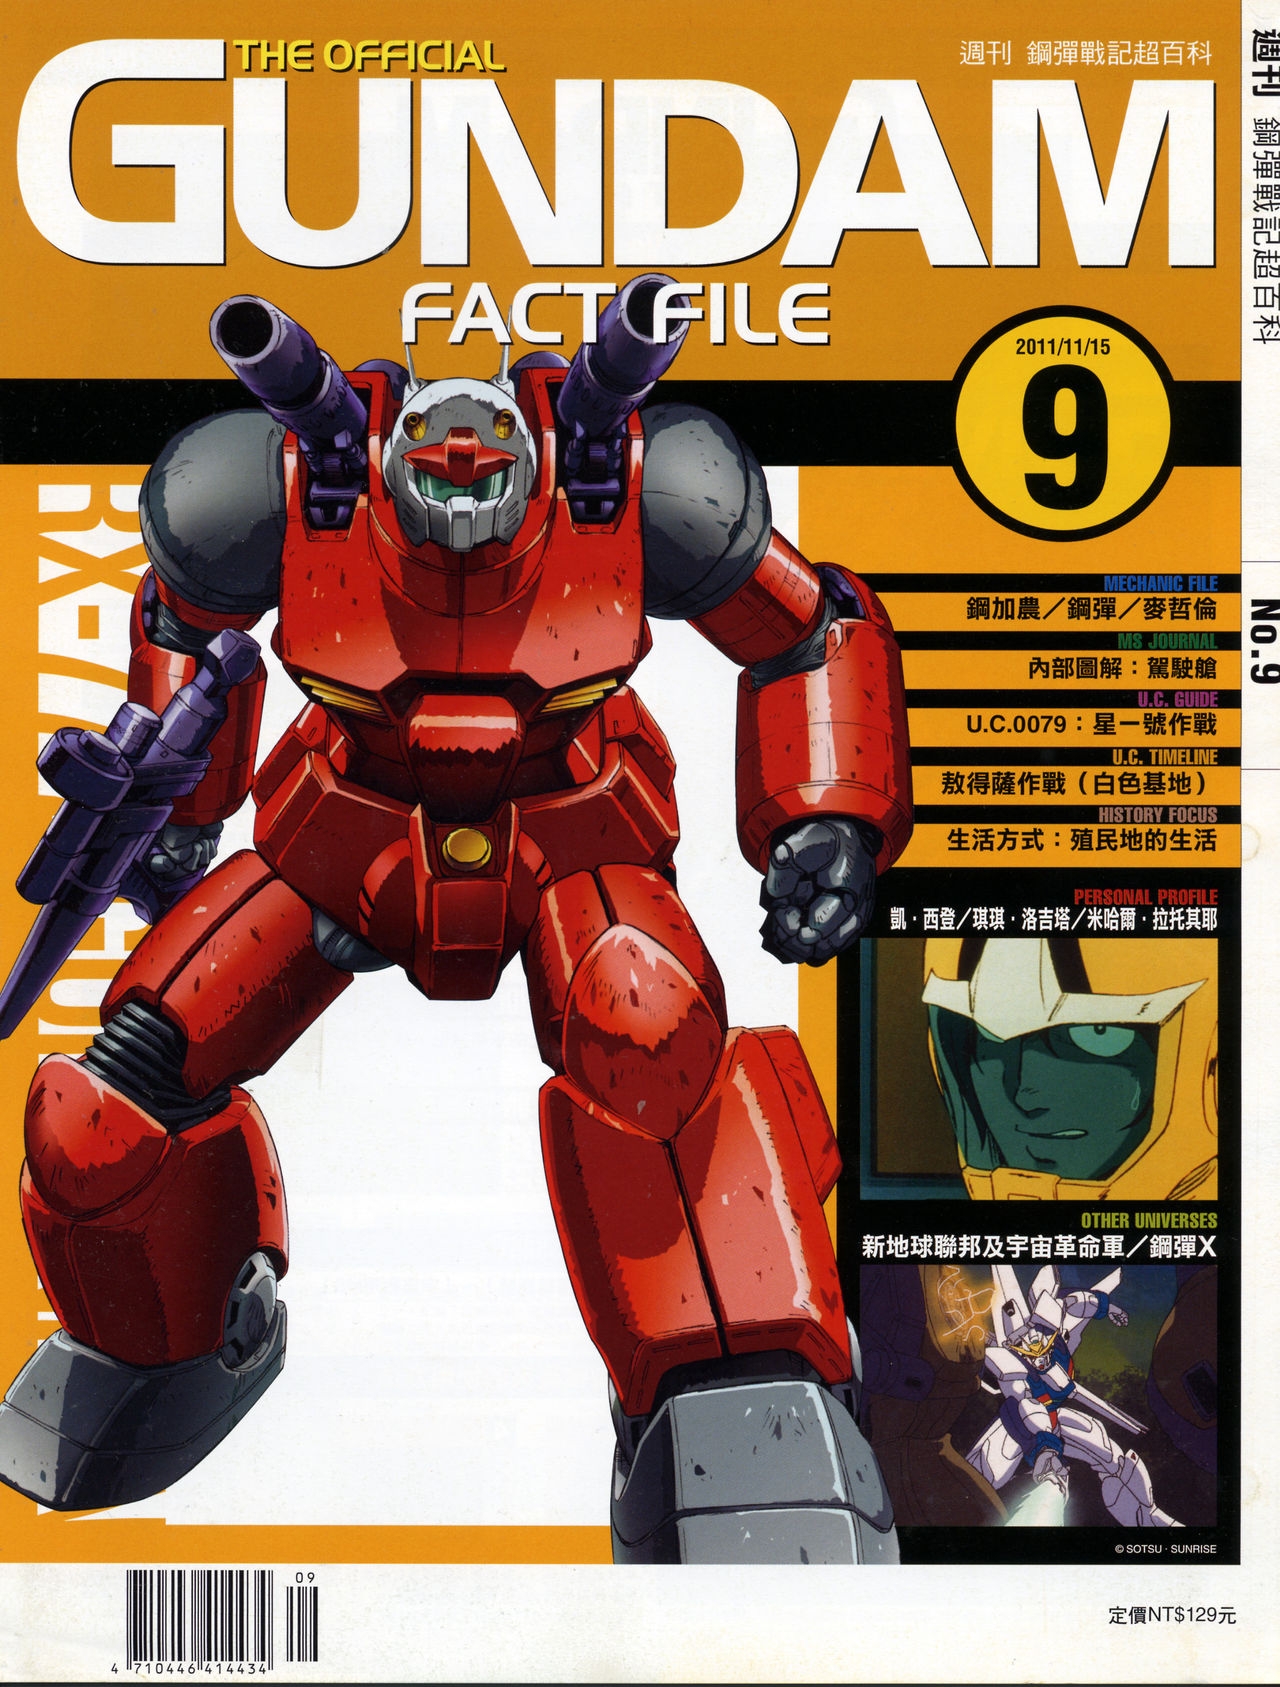 The Official Gundam Fact File - 009 [Chinese] 35